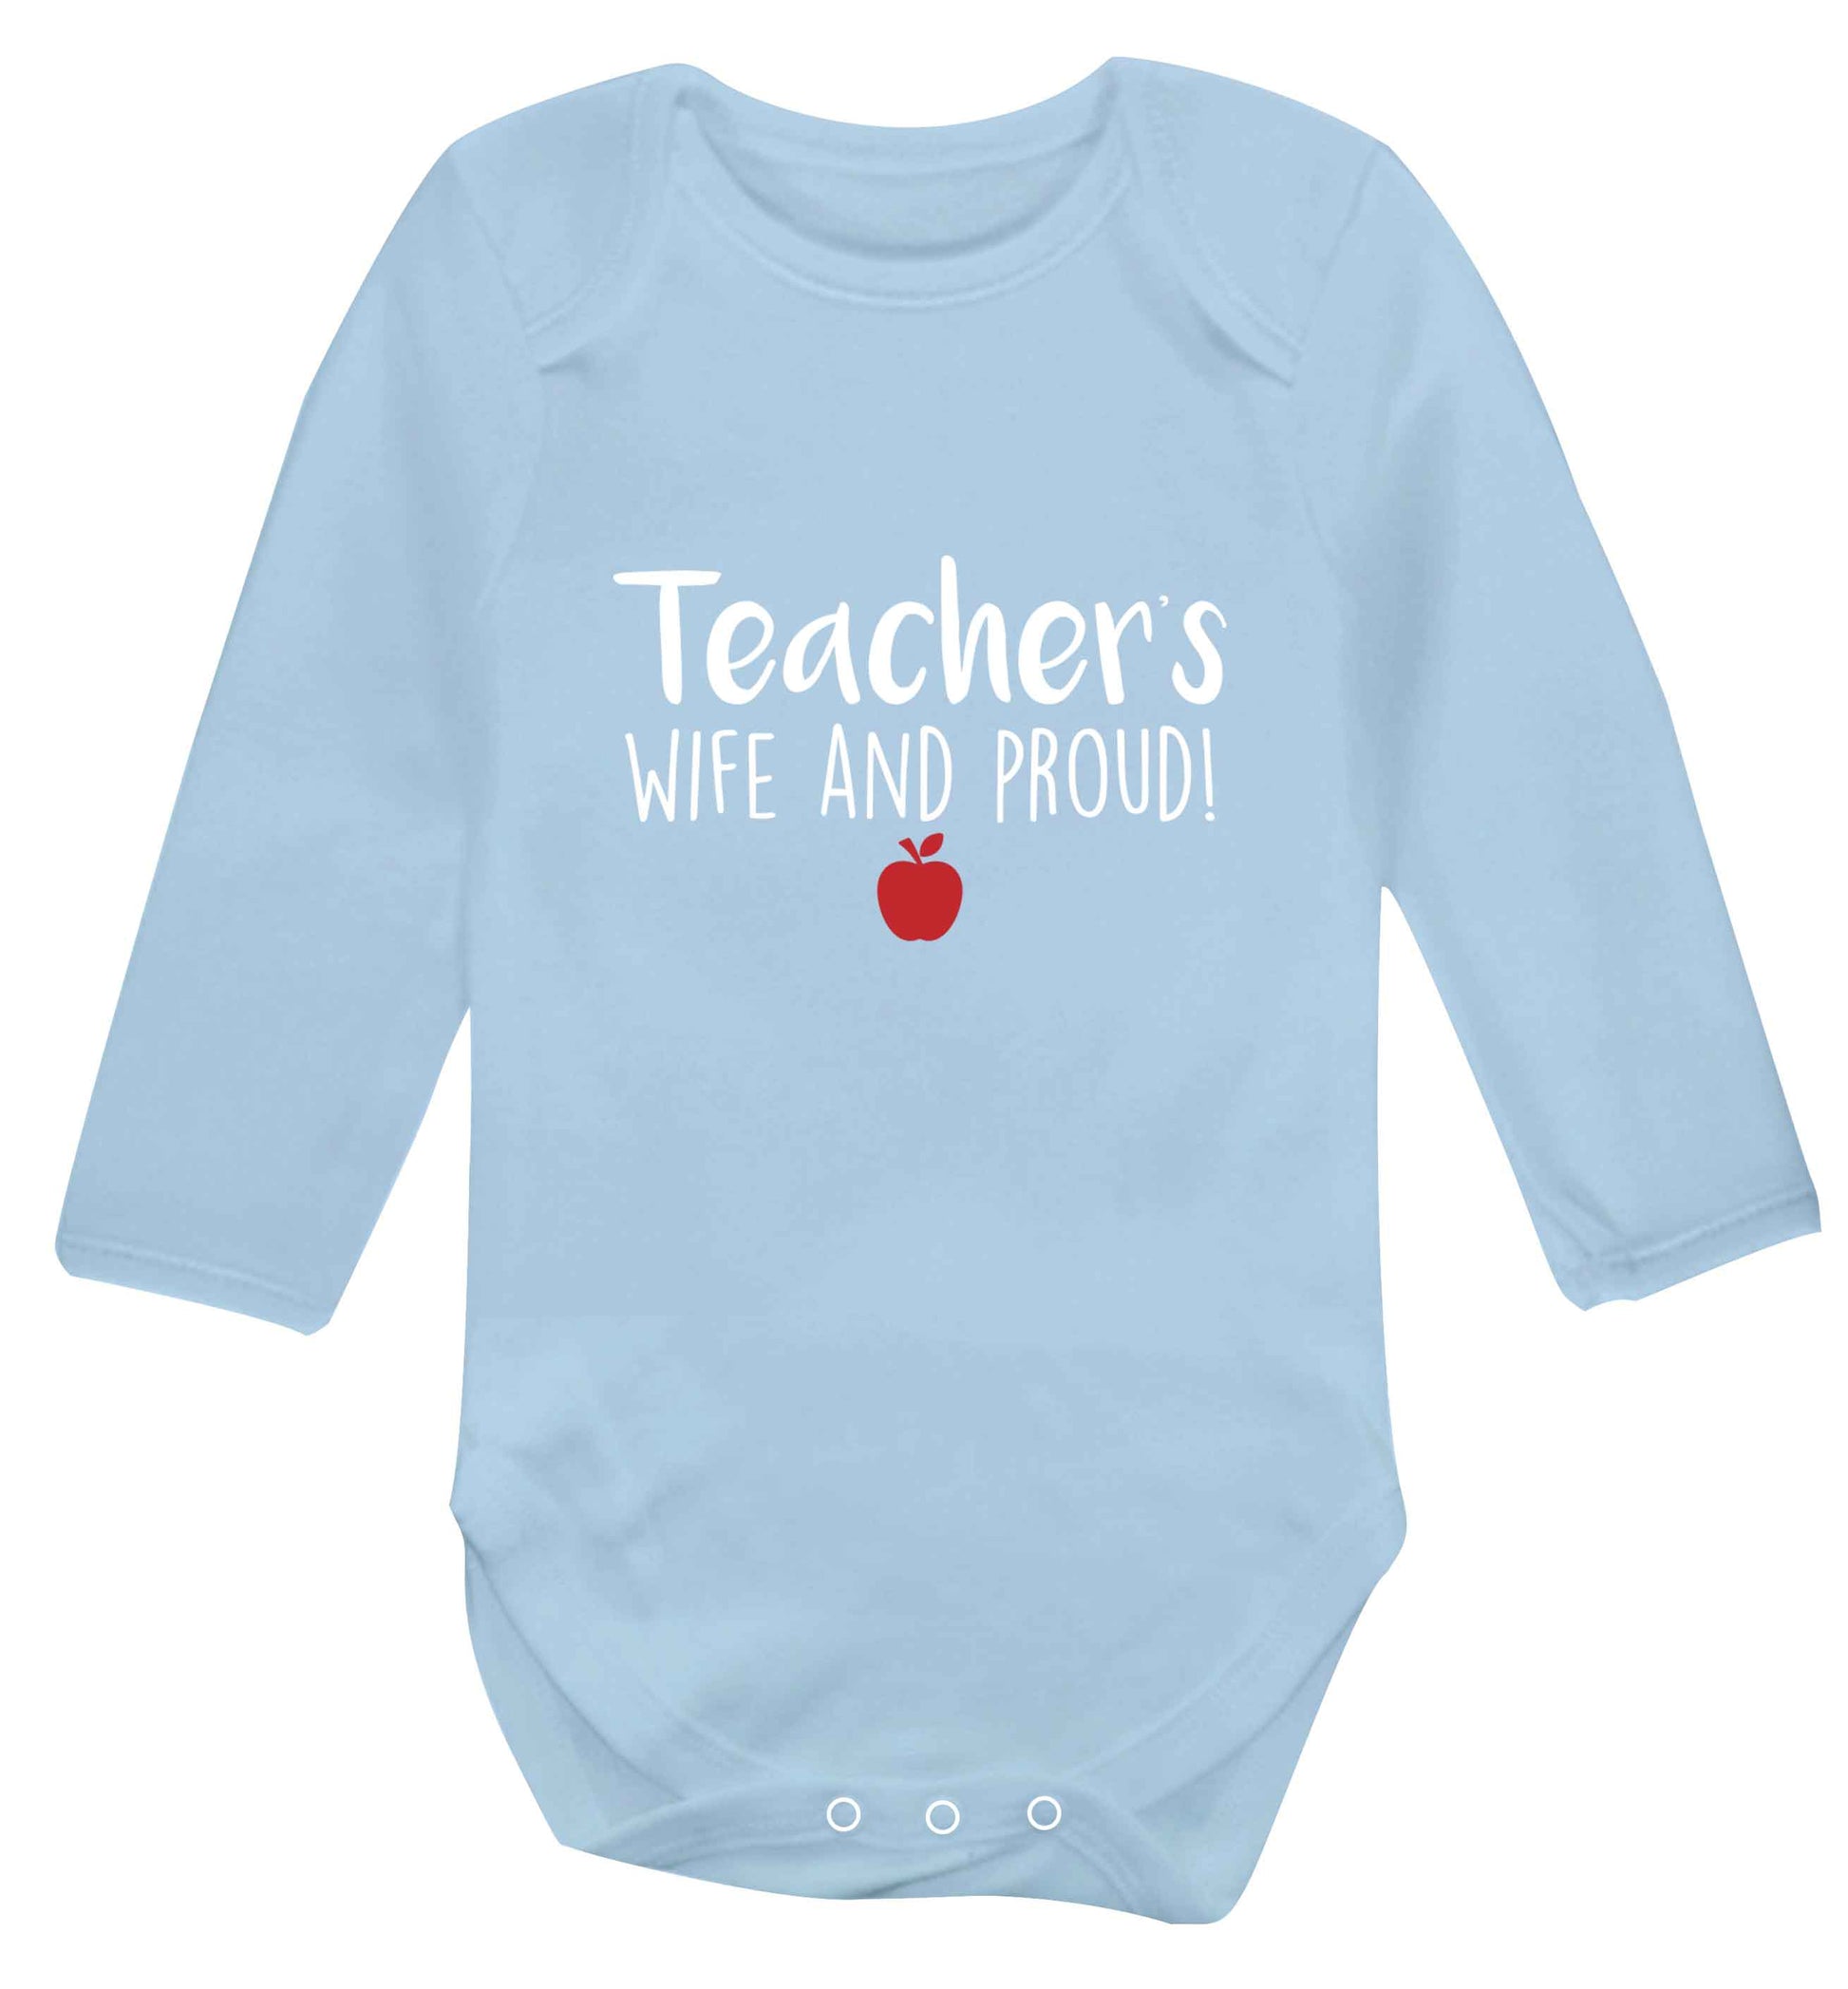 Teachers wife and proud baby vest long sleeved pale blue 6-12 months